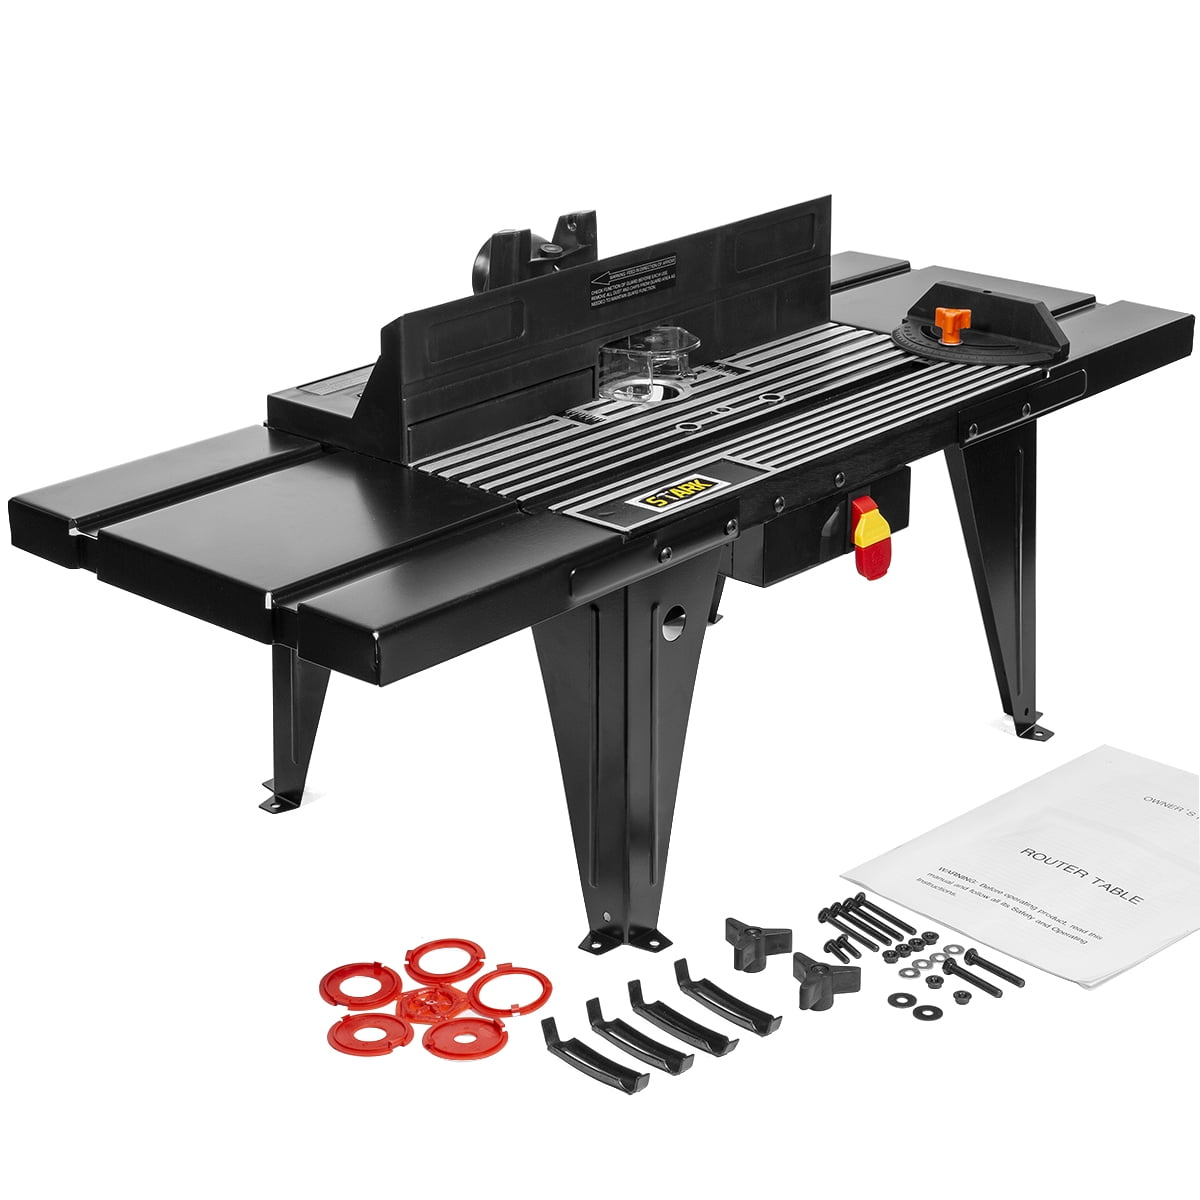 XtremepowerUS Electric Aluminum Router Table Wood Working